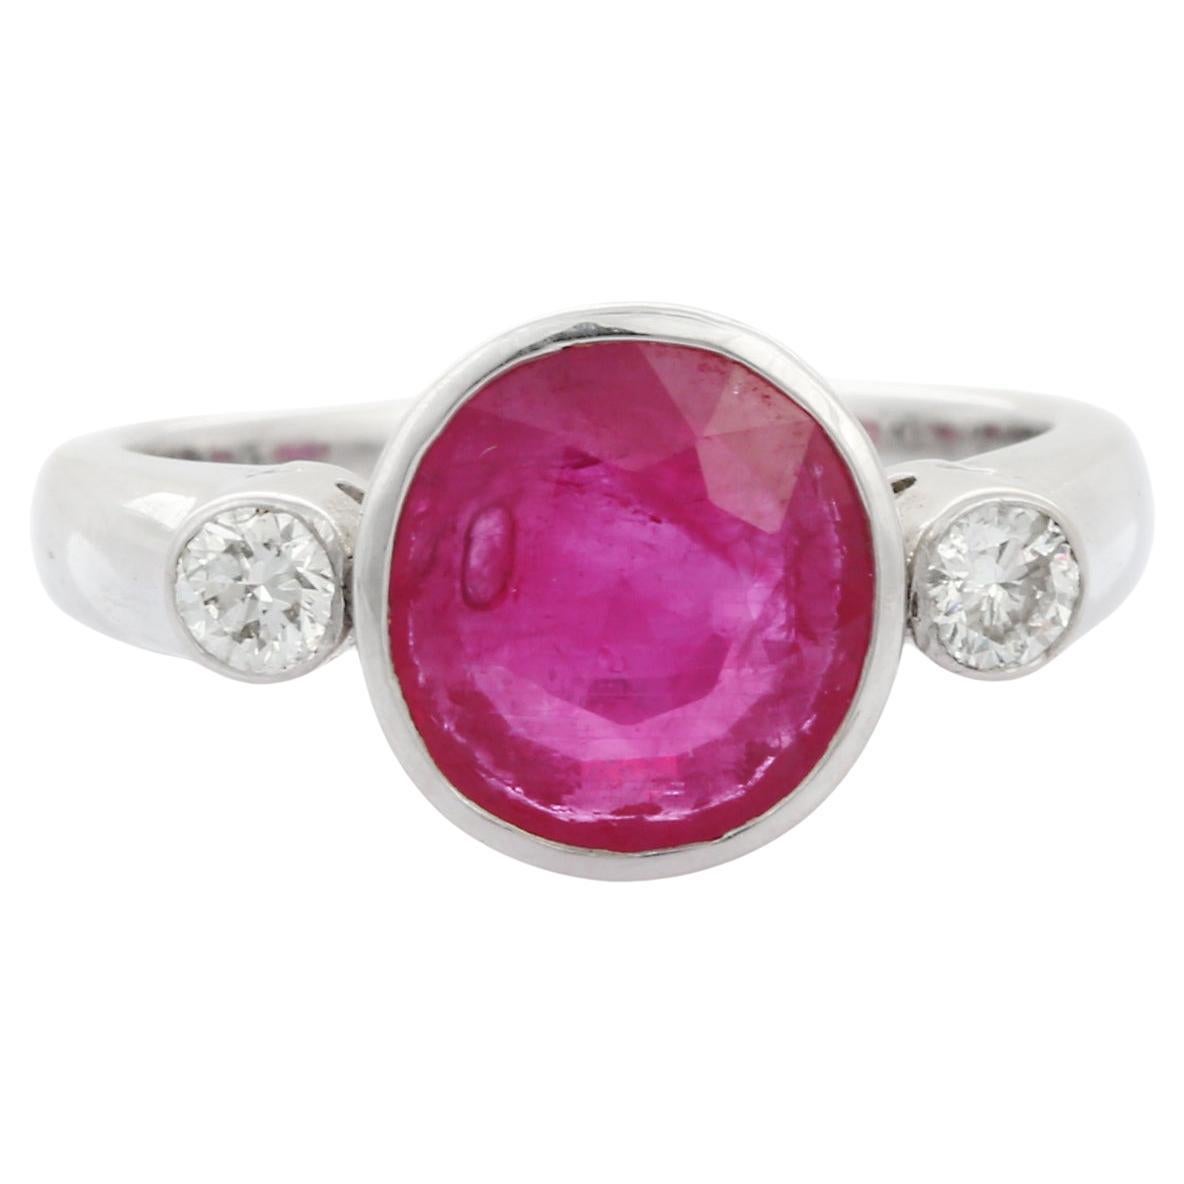 For Sale:  3 Carat Classical Round Cut Ruby and Diamond Three Stone Ring in 18K White Gold